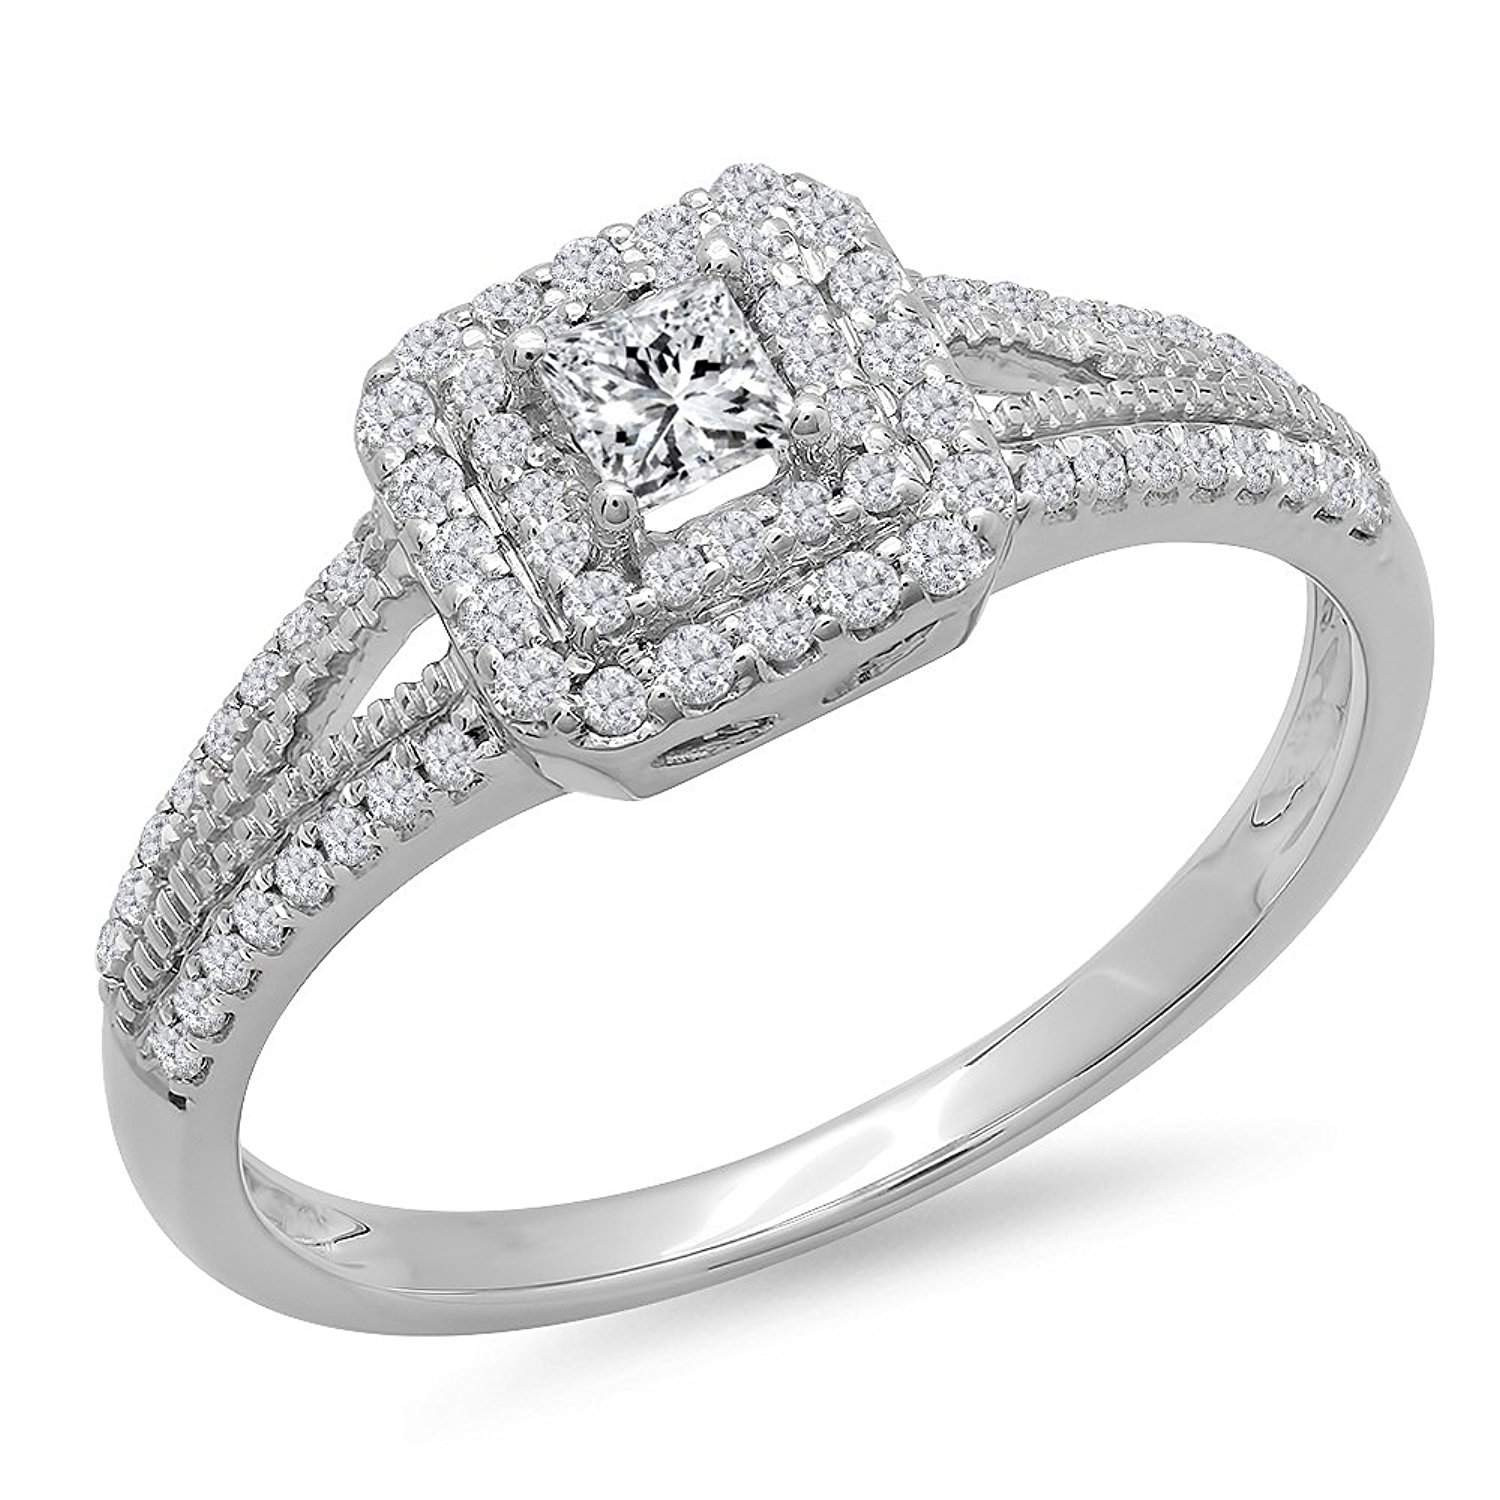 Cheap Diamond Engagement Ring
 Top 10 Best Valentine’s Day Deals on Engagement Rings